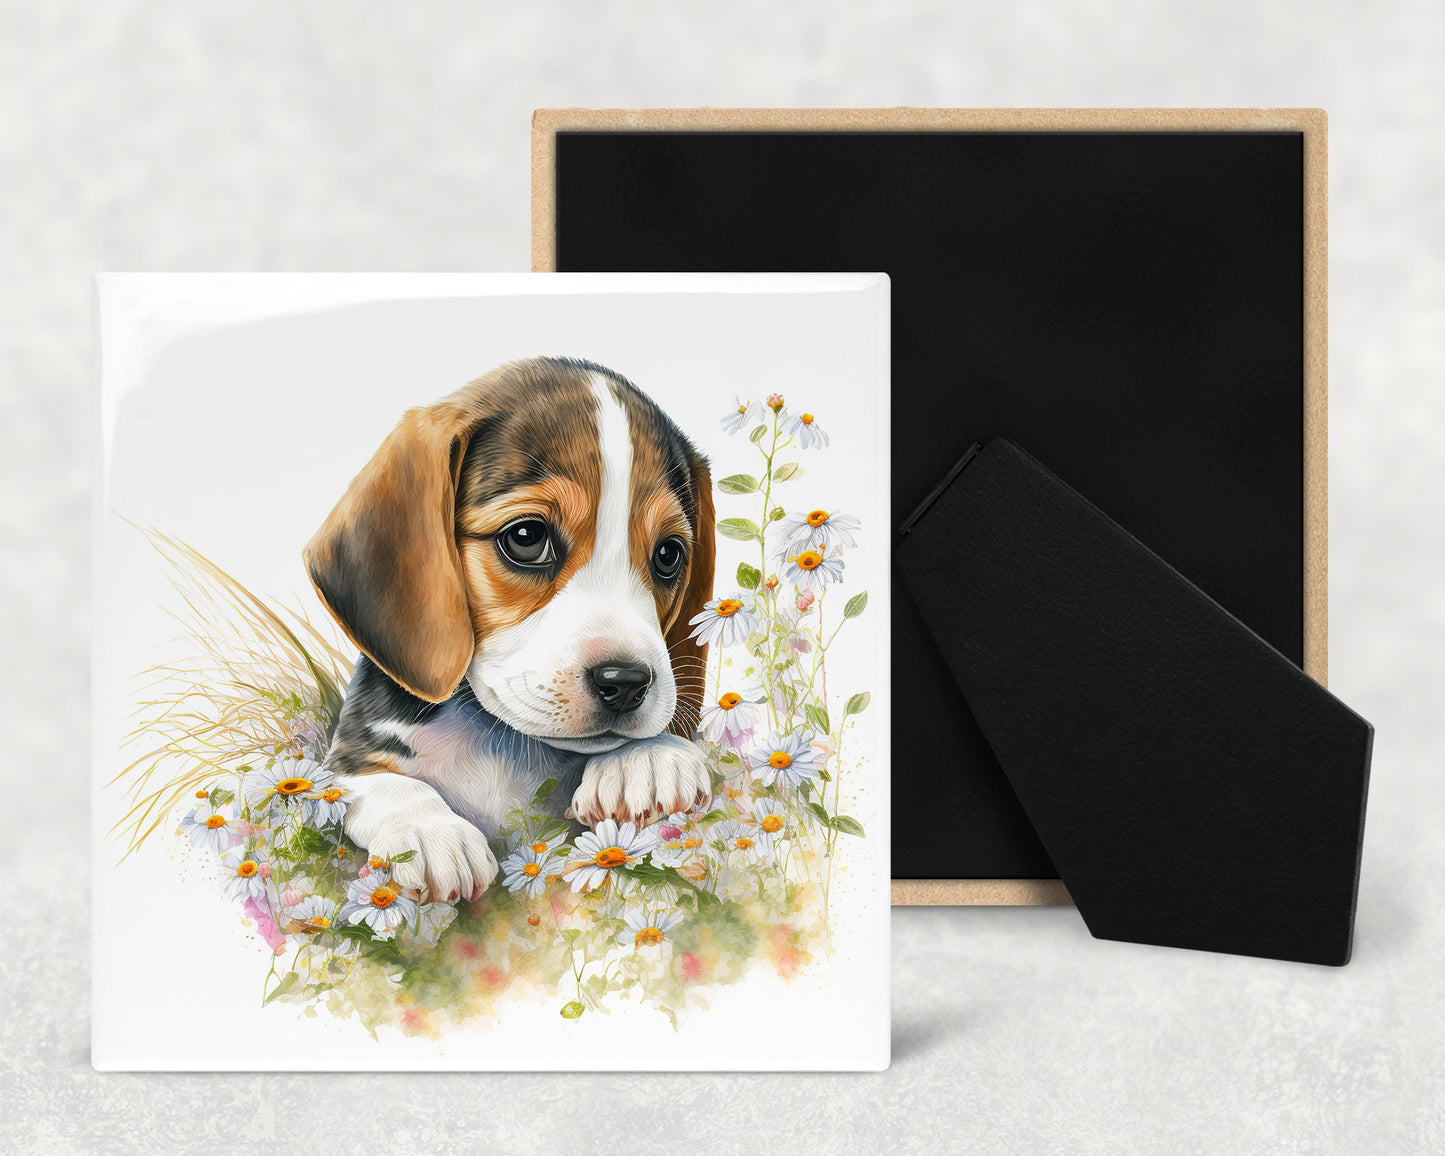 Cute Beagle Puppy Art Decorative Ceramic Tile Set with Optional Easel Back - Available in 4 sizes - Set of 4